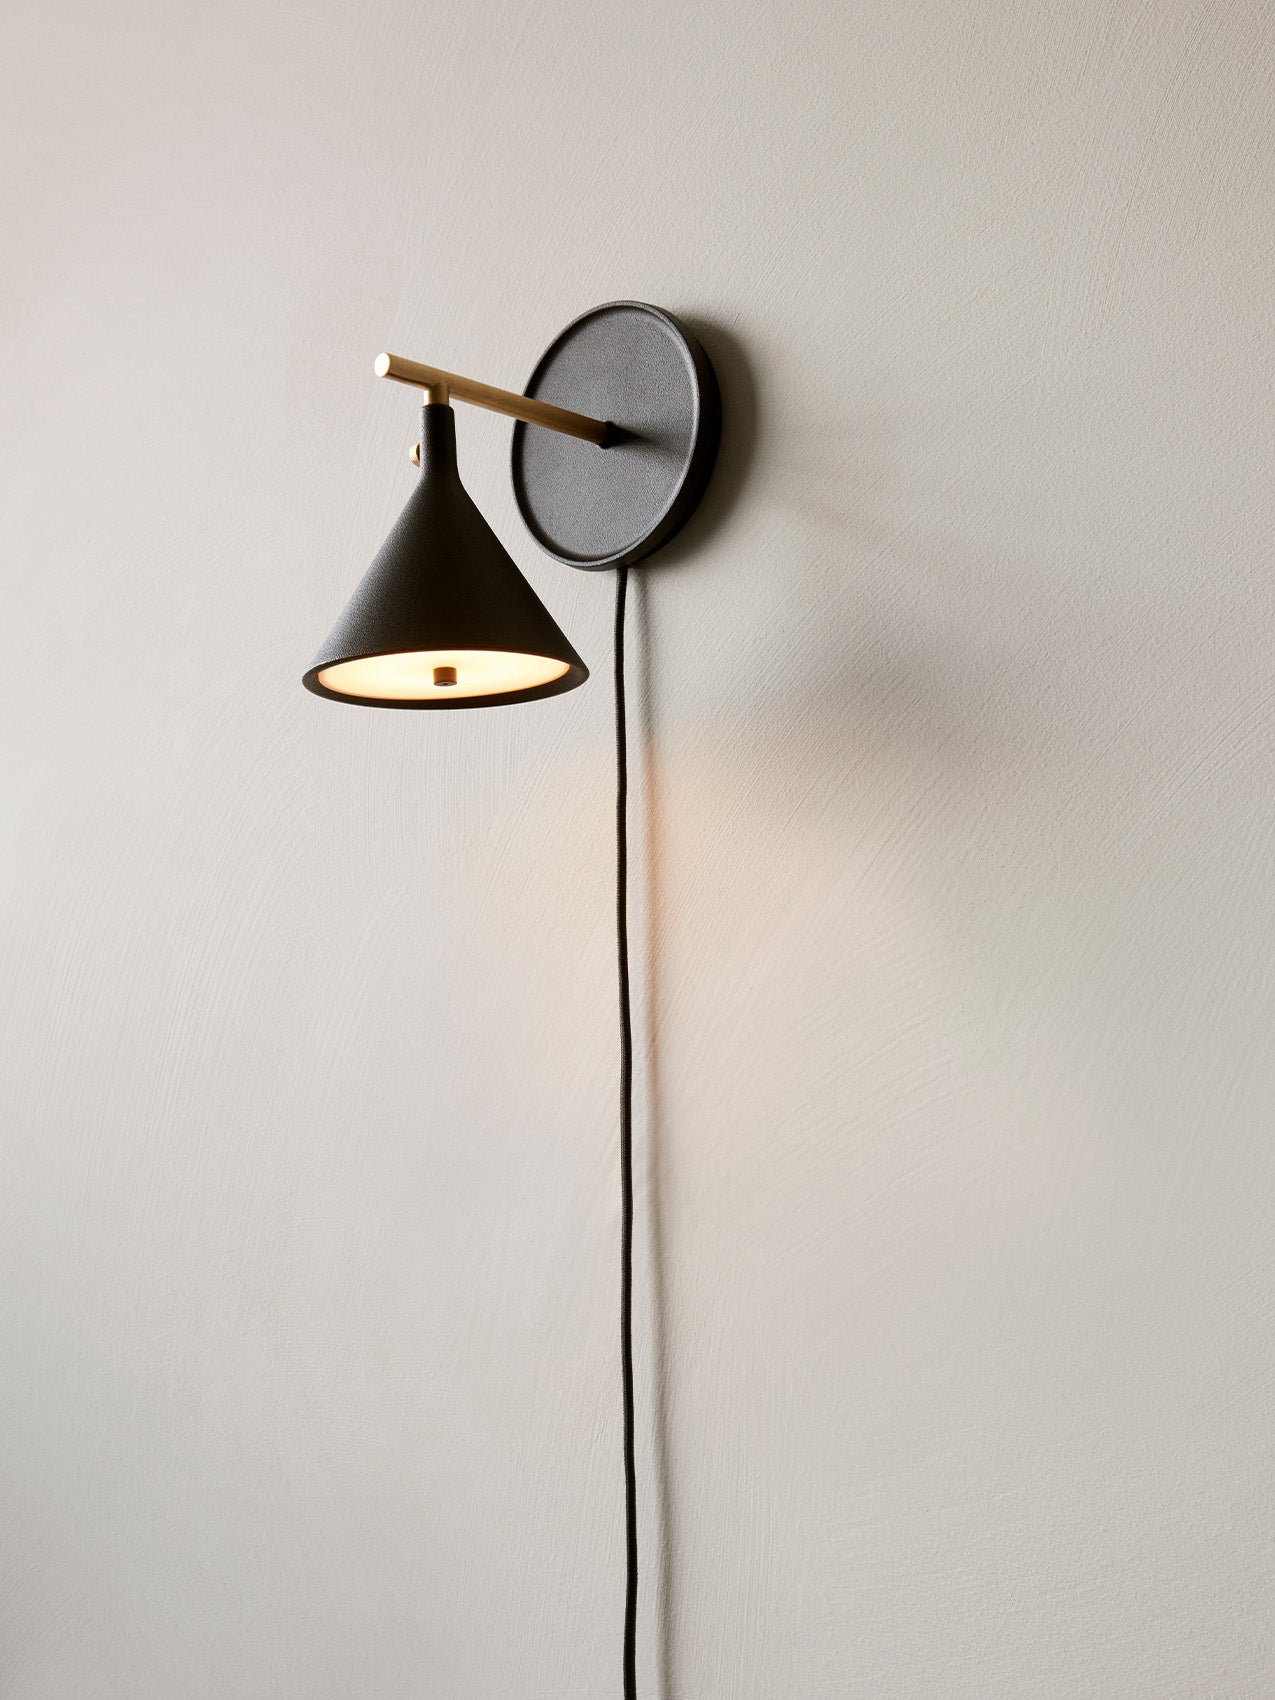 Cast Sconce Wall Lamp with Diffuser, Dimmable